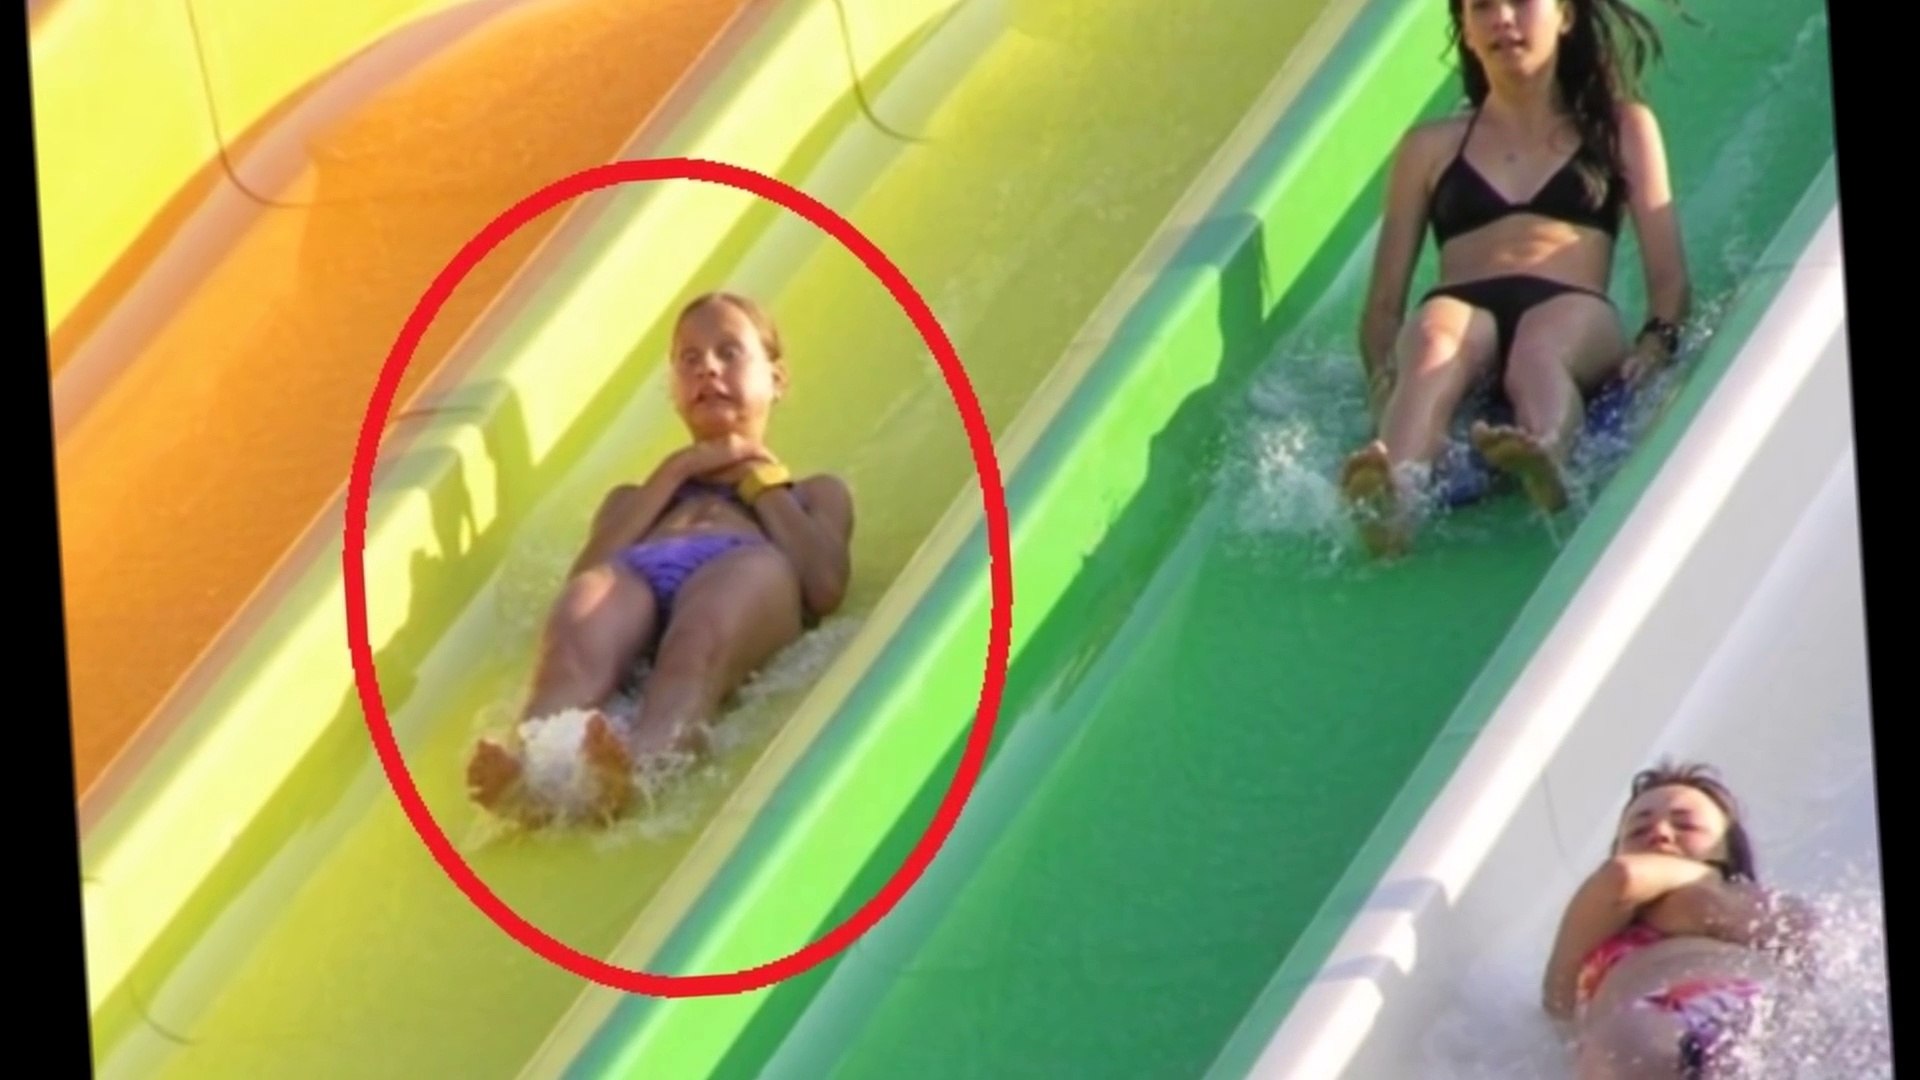 10 Water Slide Fails Photos - video Dailymotion